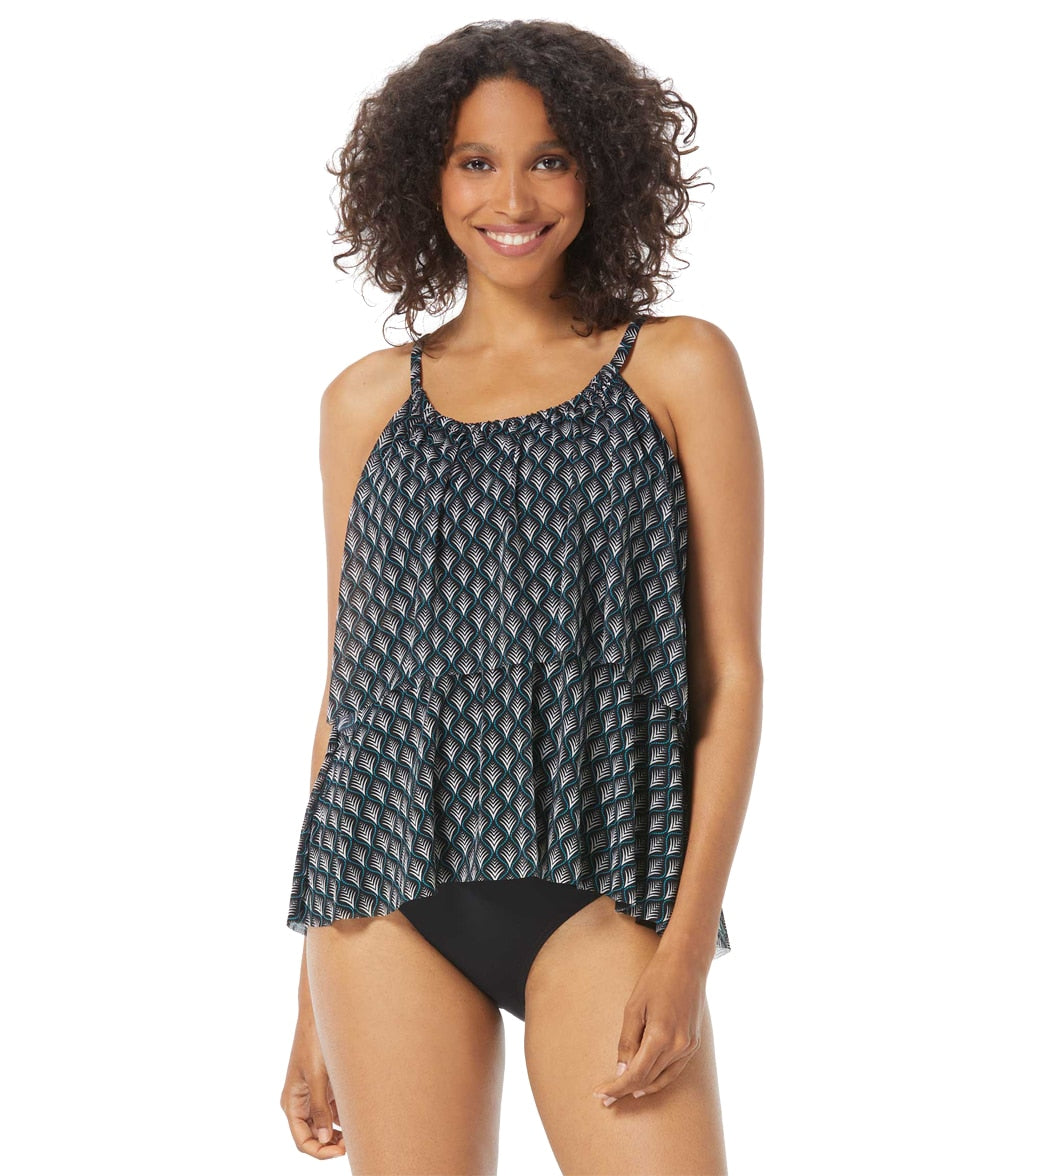 Coco Reef Current Mesh-layer Bra-sized Tankini Top & Bottoms in Blue